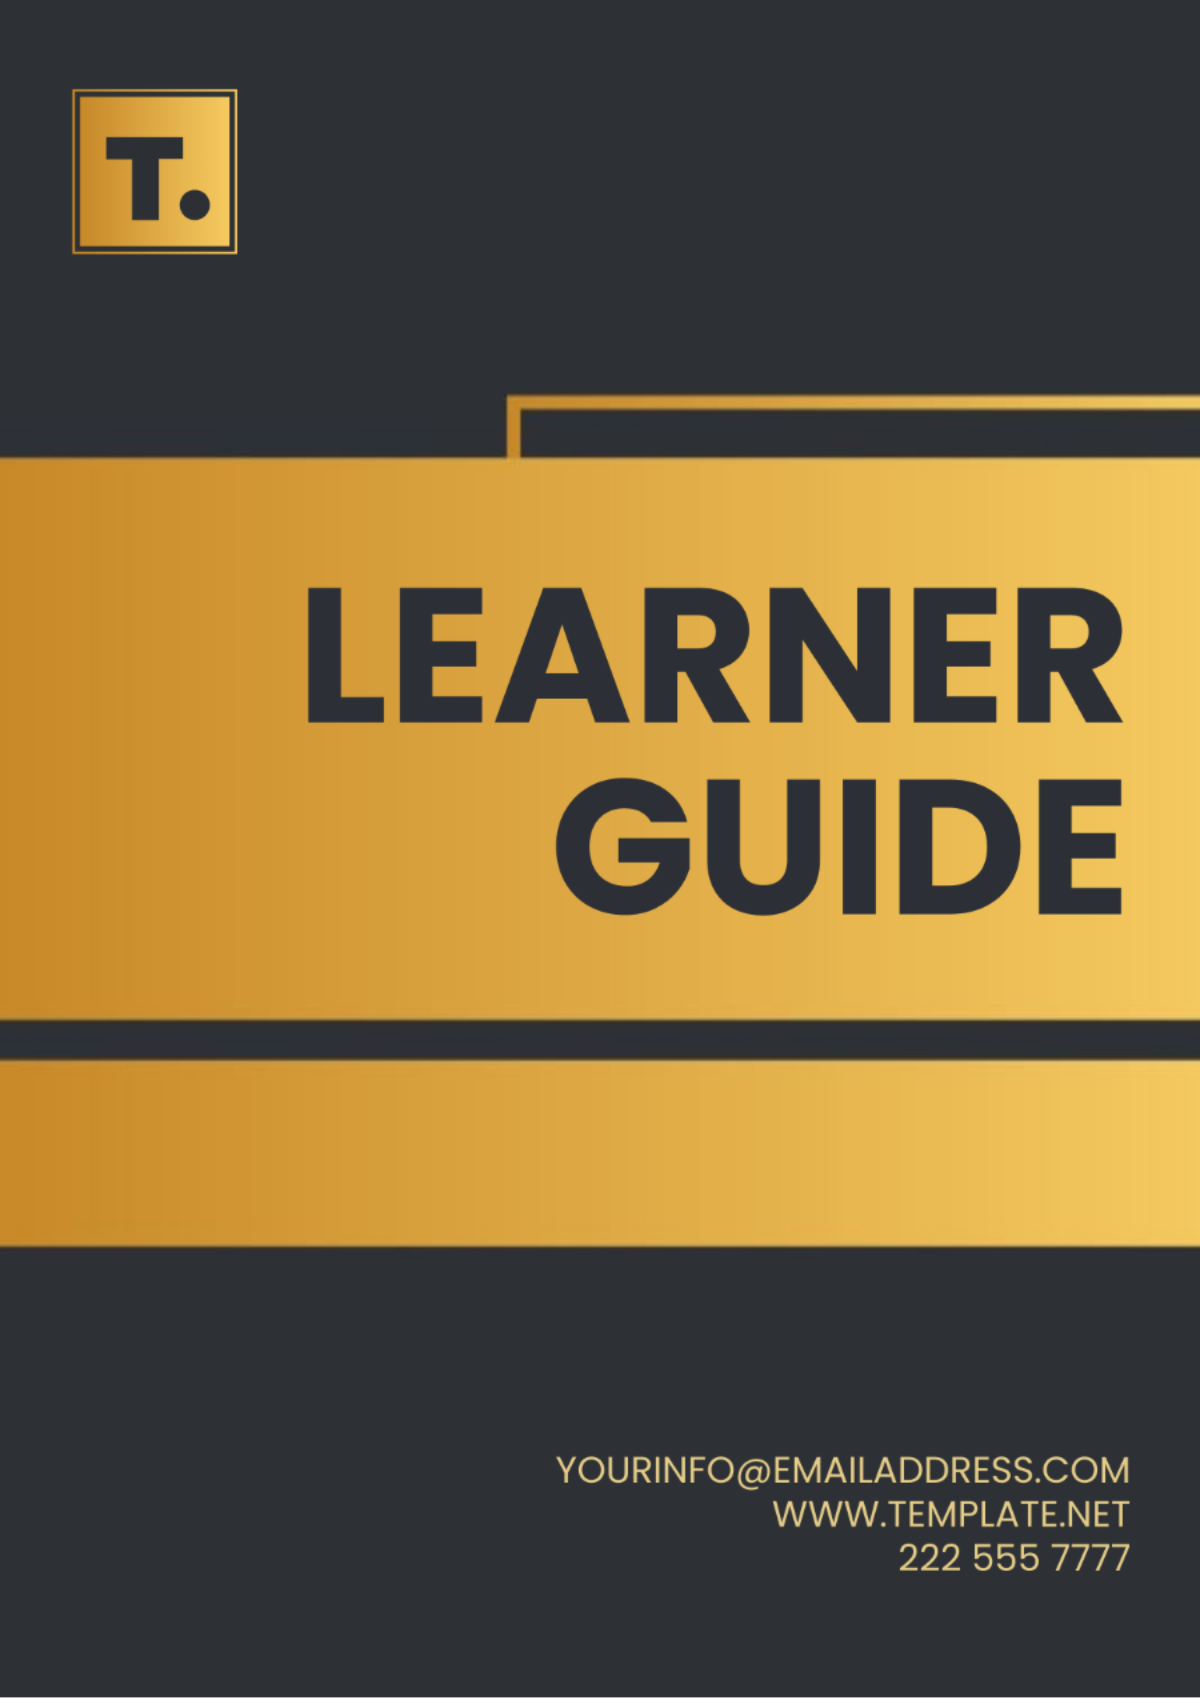 Free Learner Guide Template